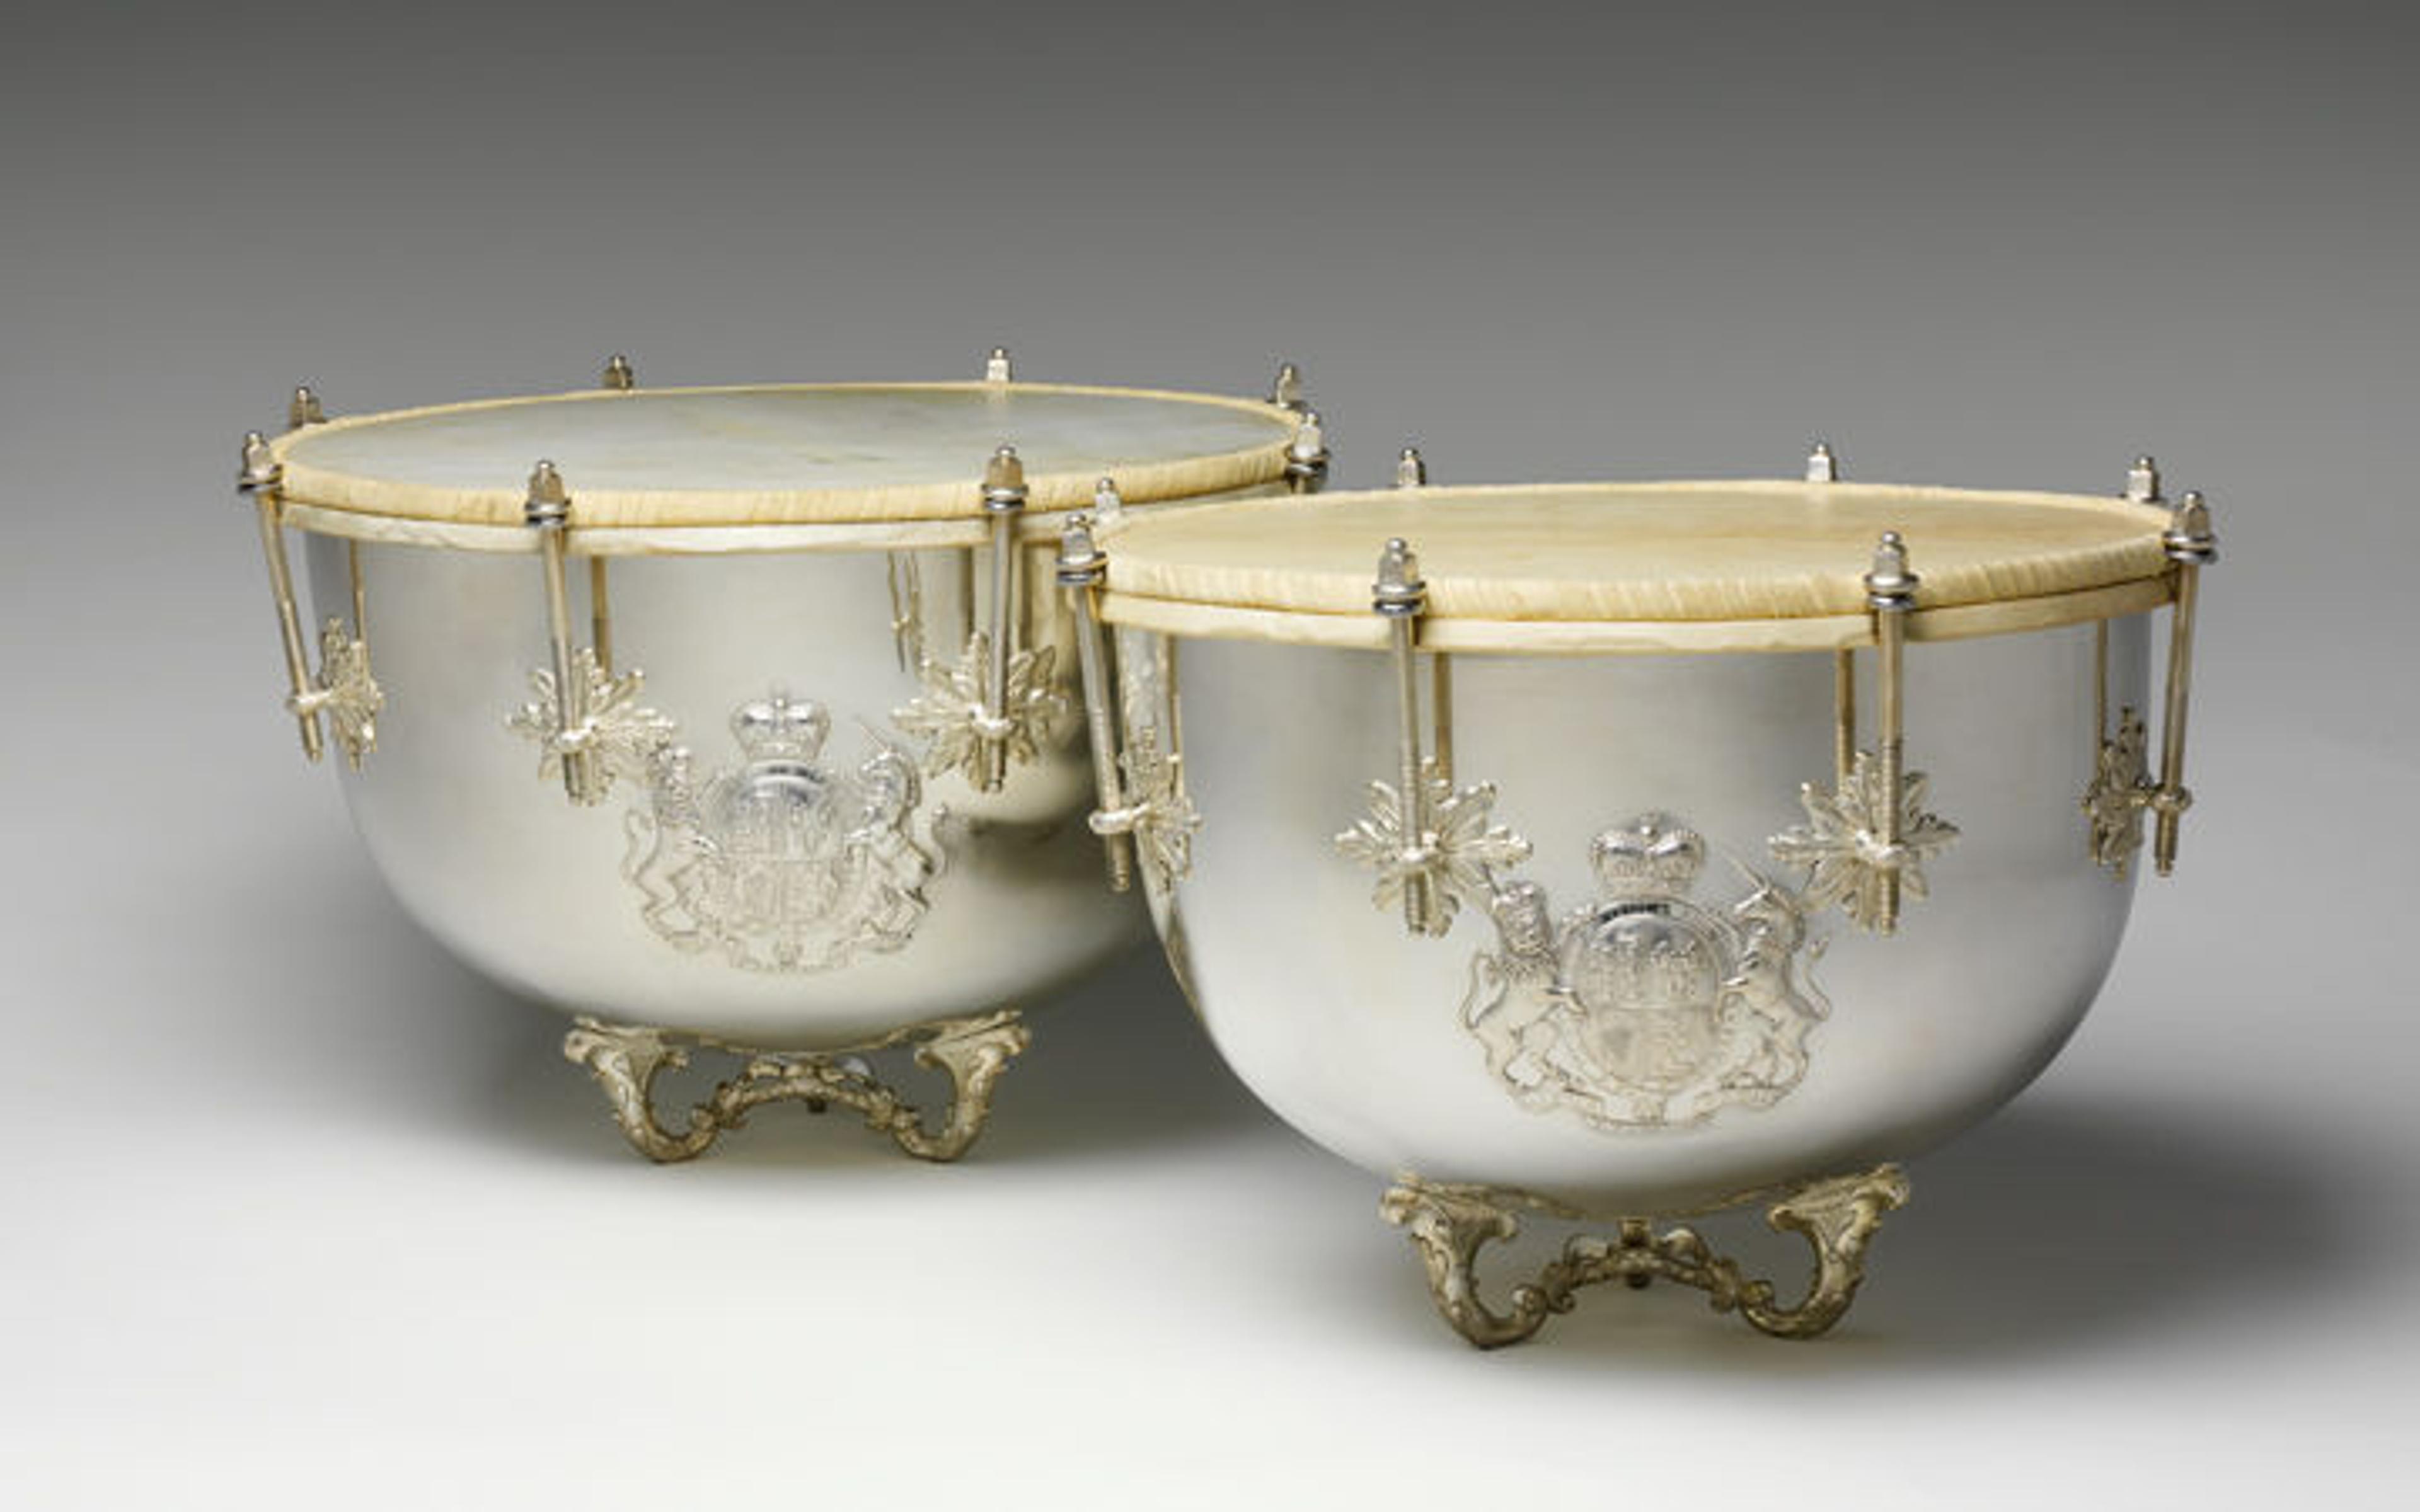 A pair of solid silver kettledrums with ornate bases and heraldic coats of arms